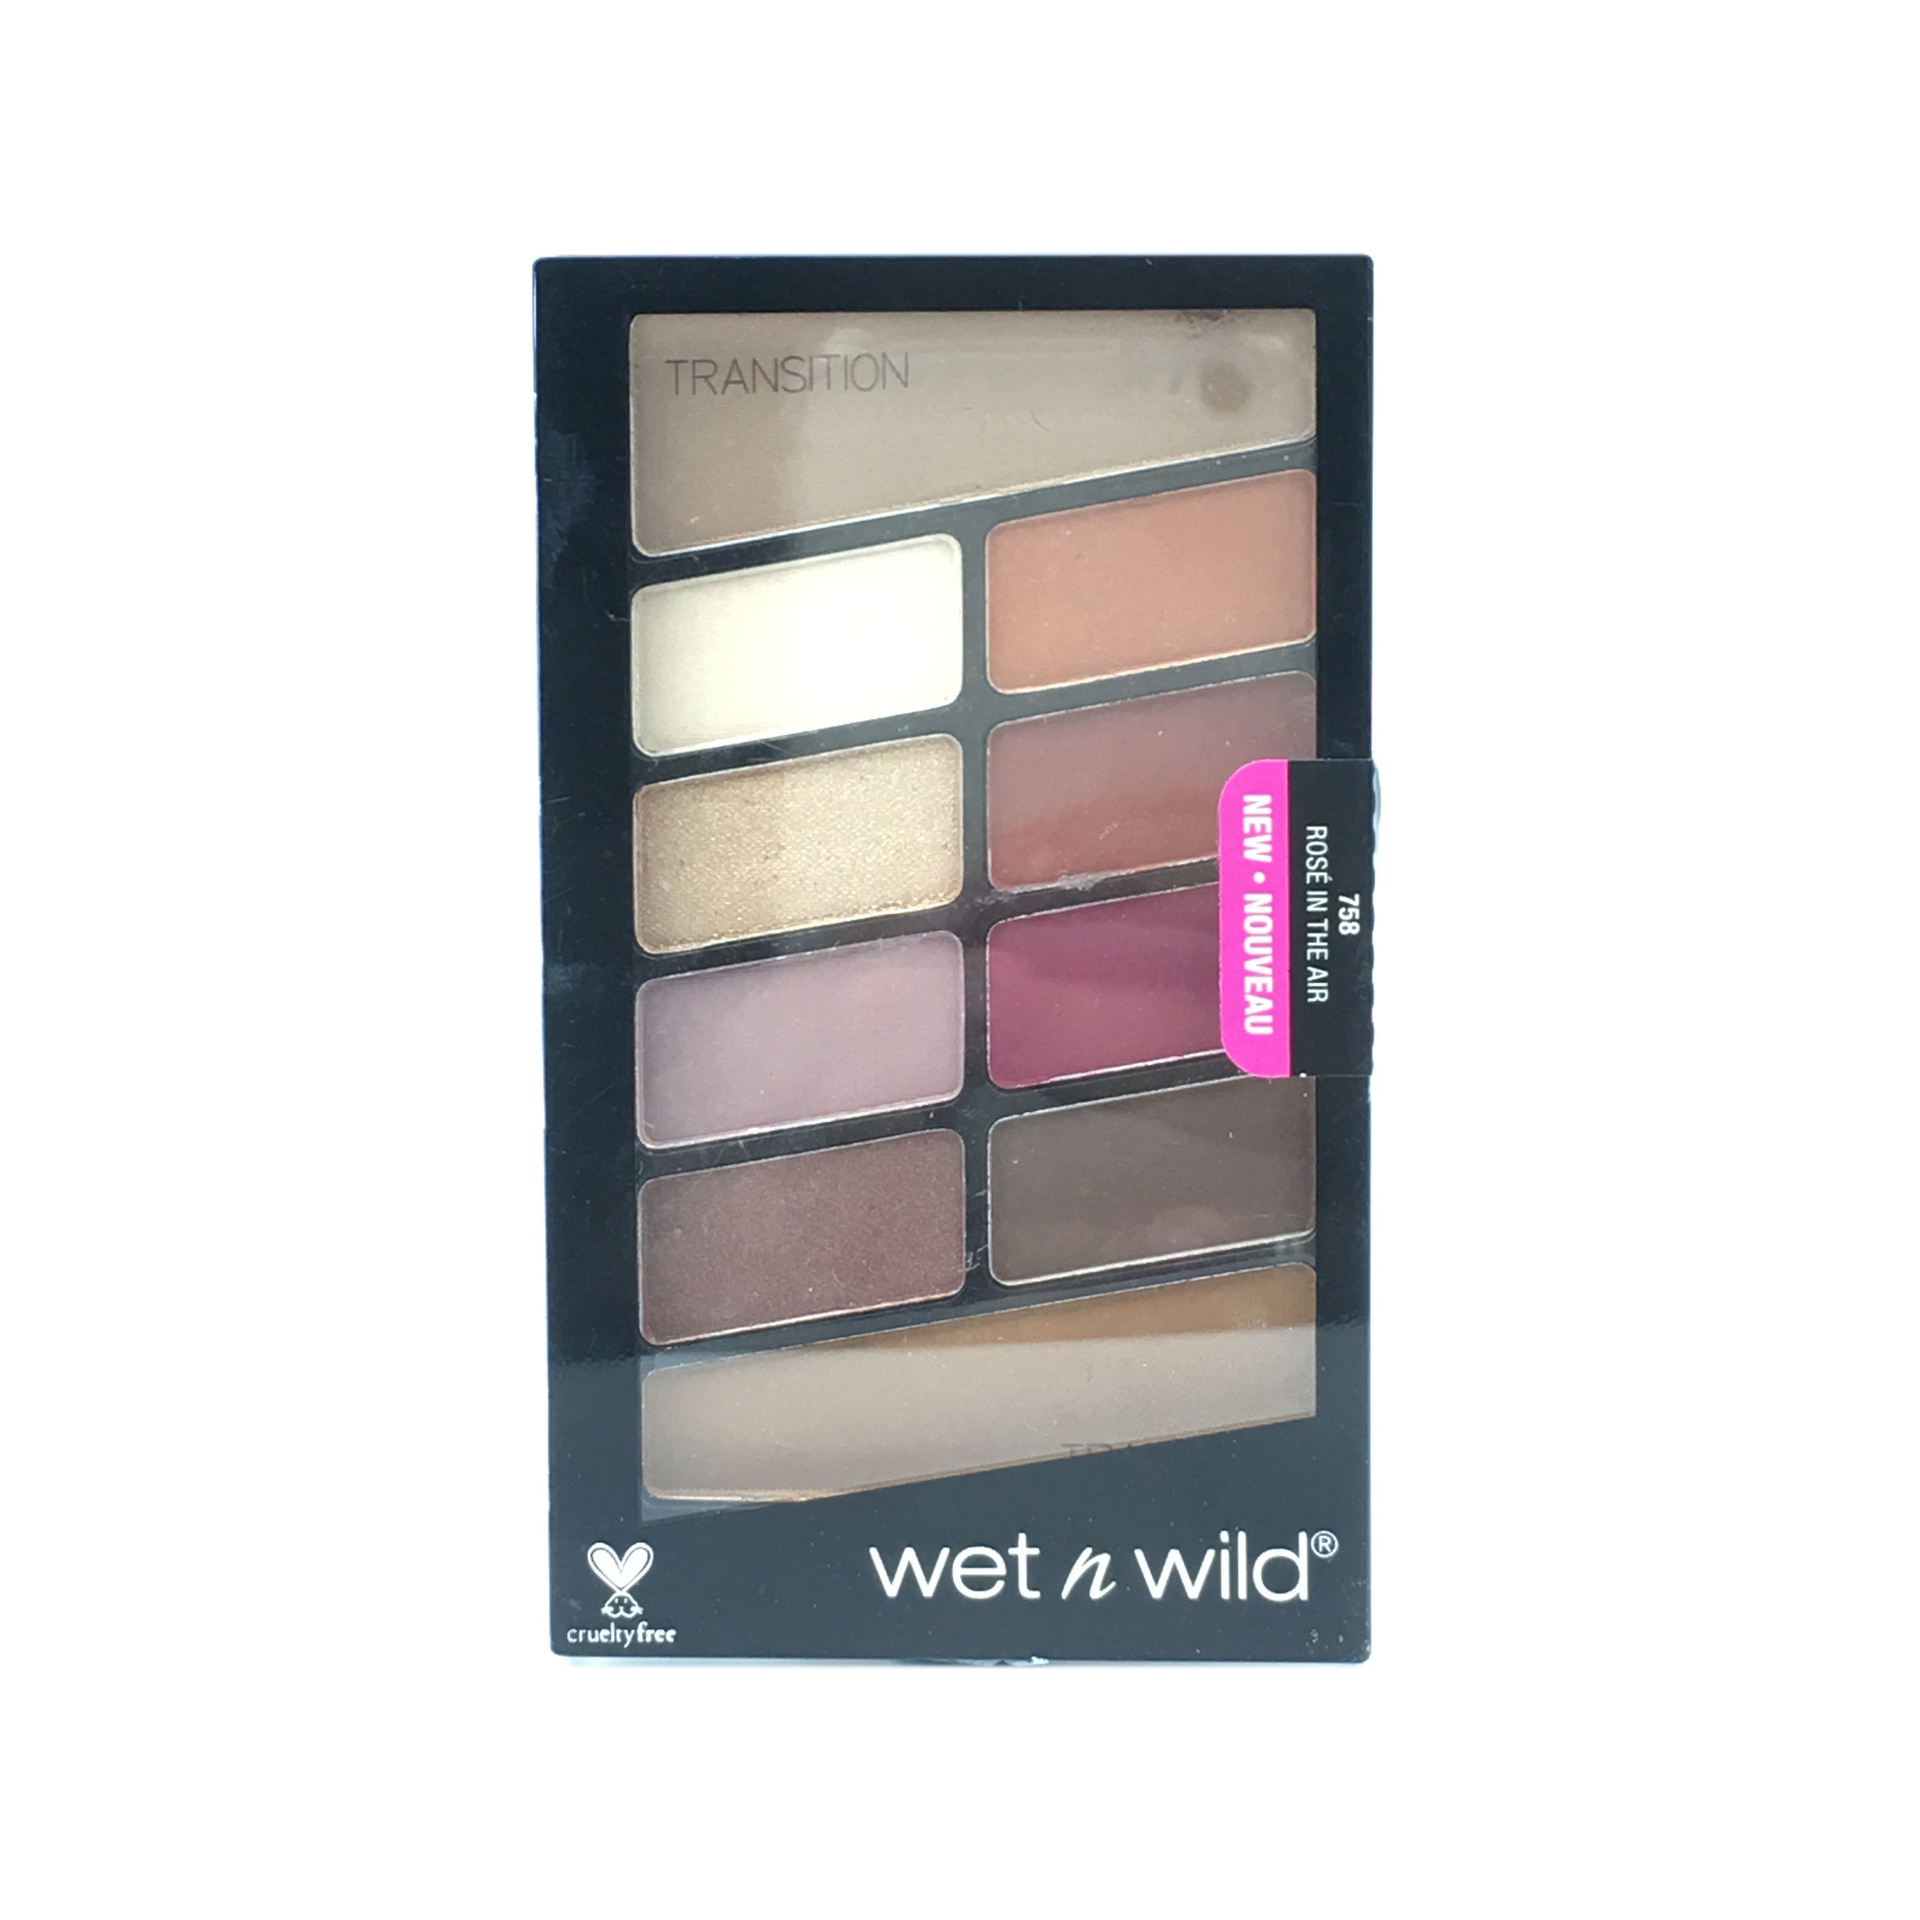 Wet N Wild Rose In The Air Sets And Palette